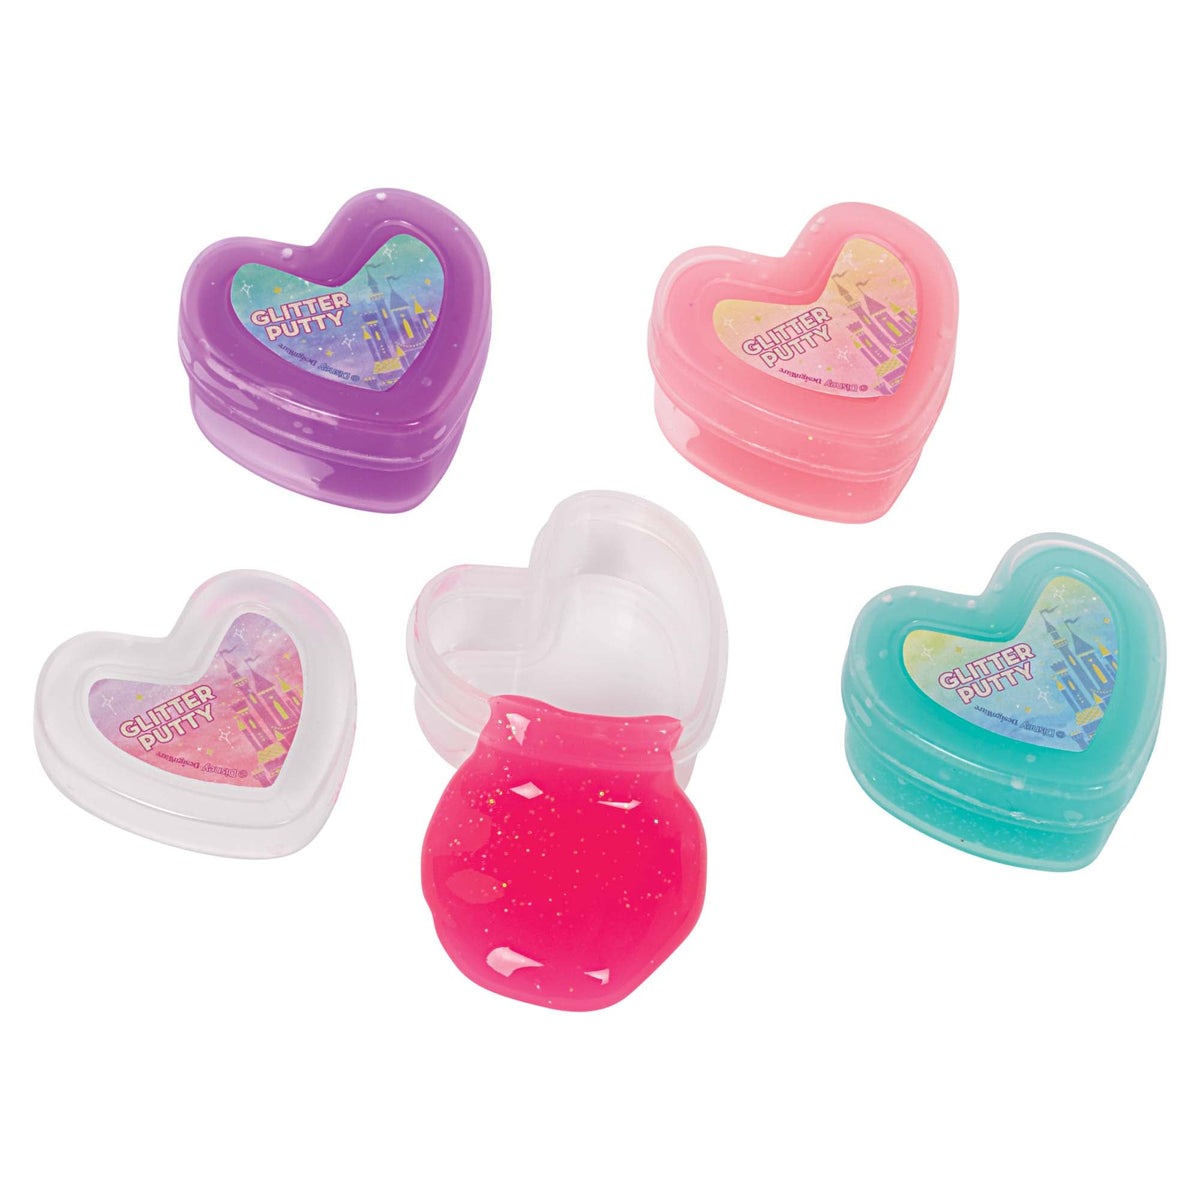 Disney Princess Glitter Putty Favors Package of 4